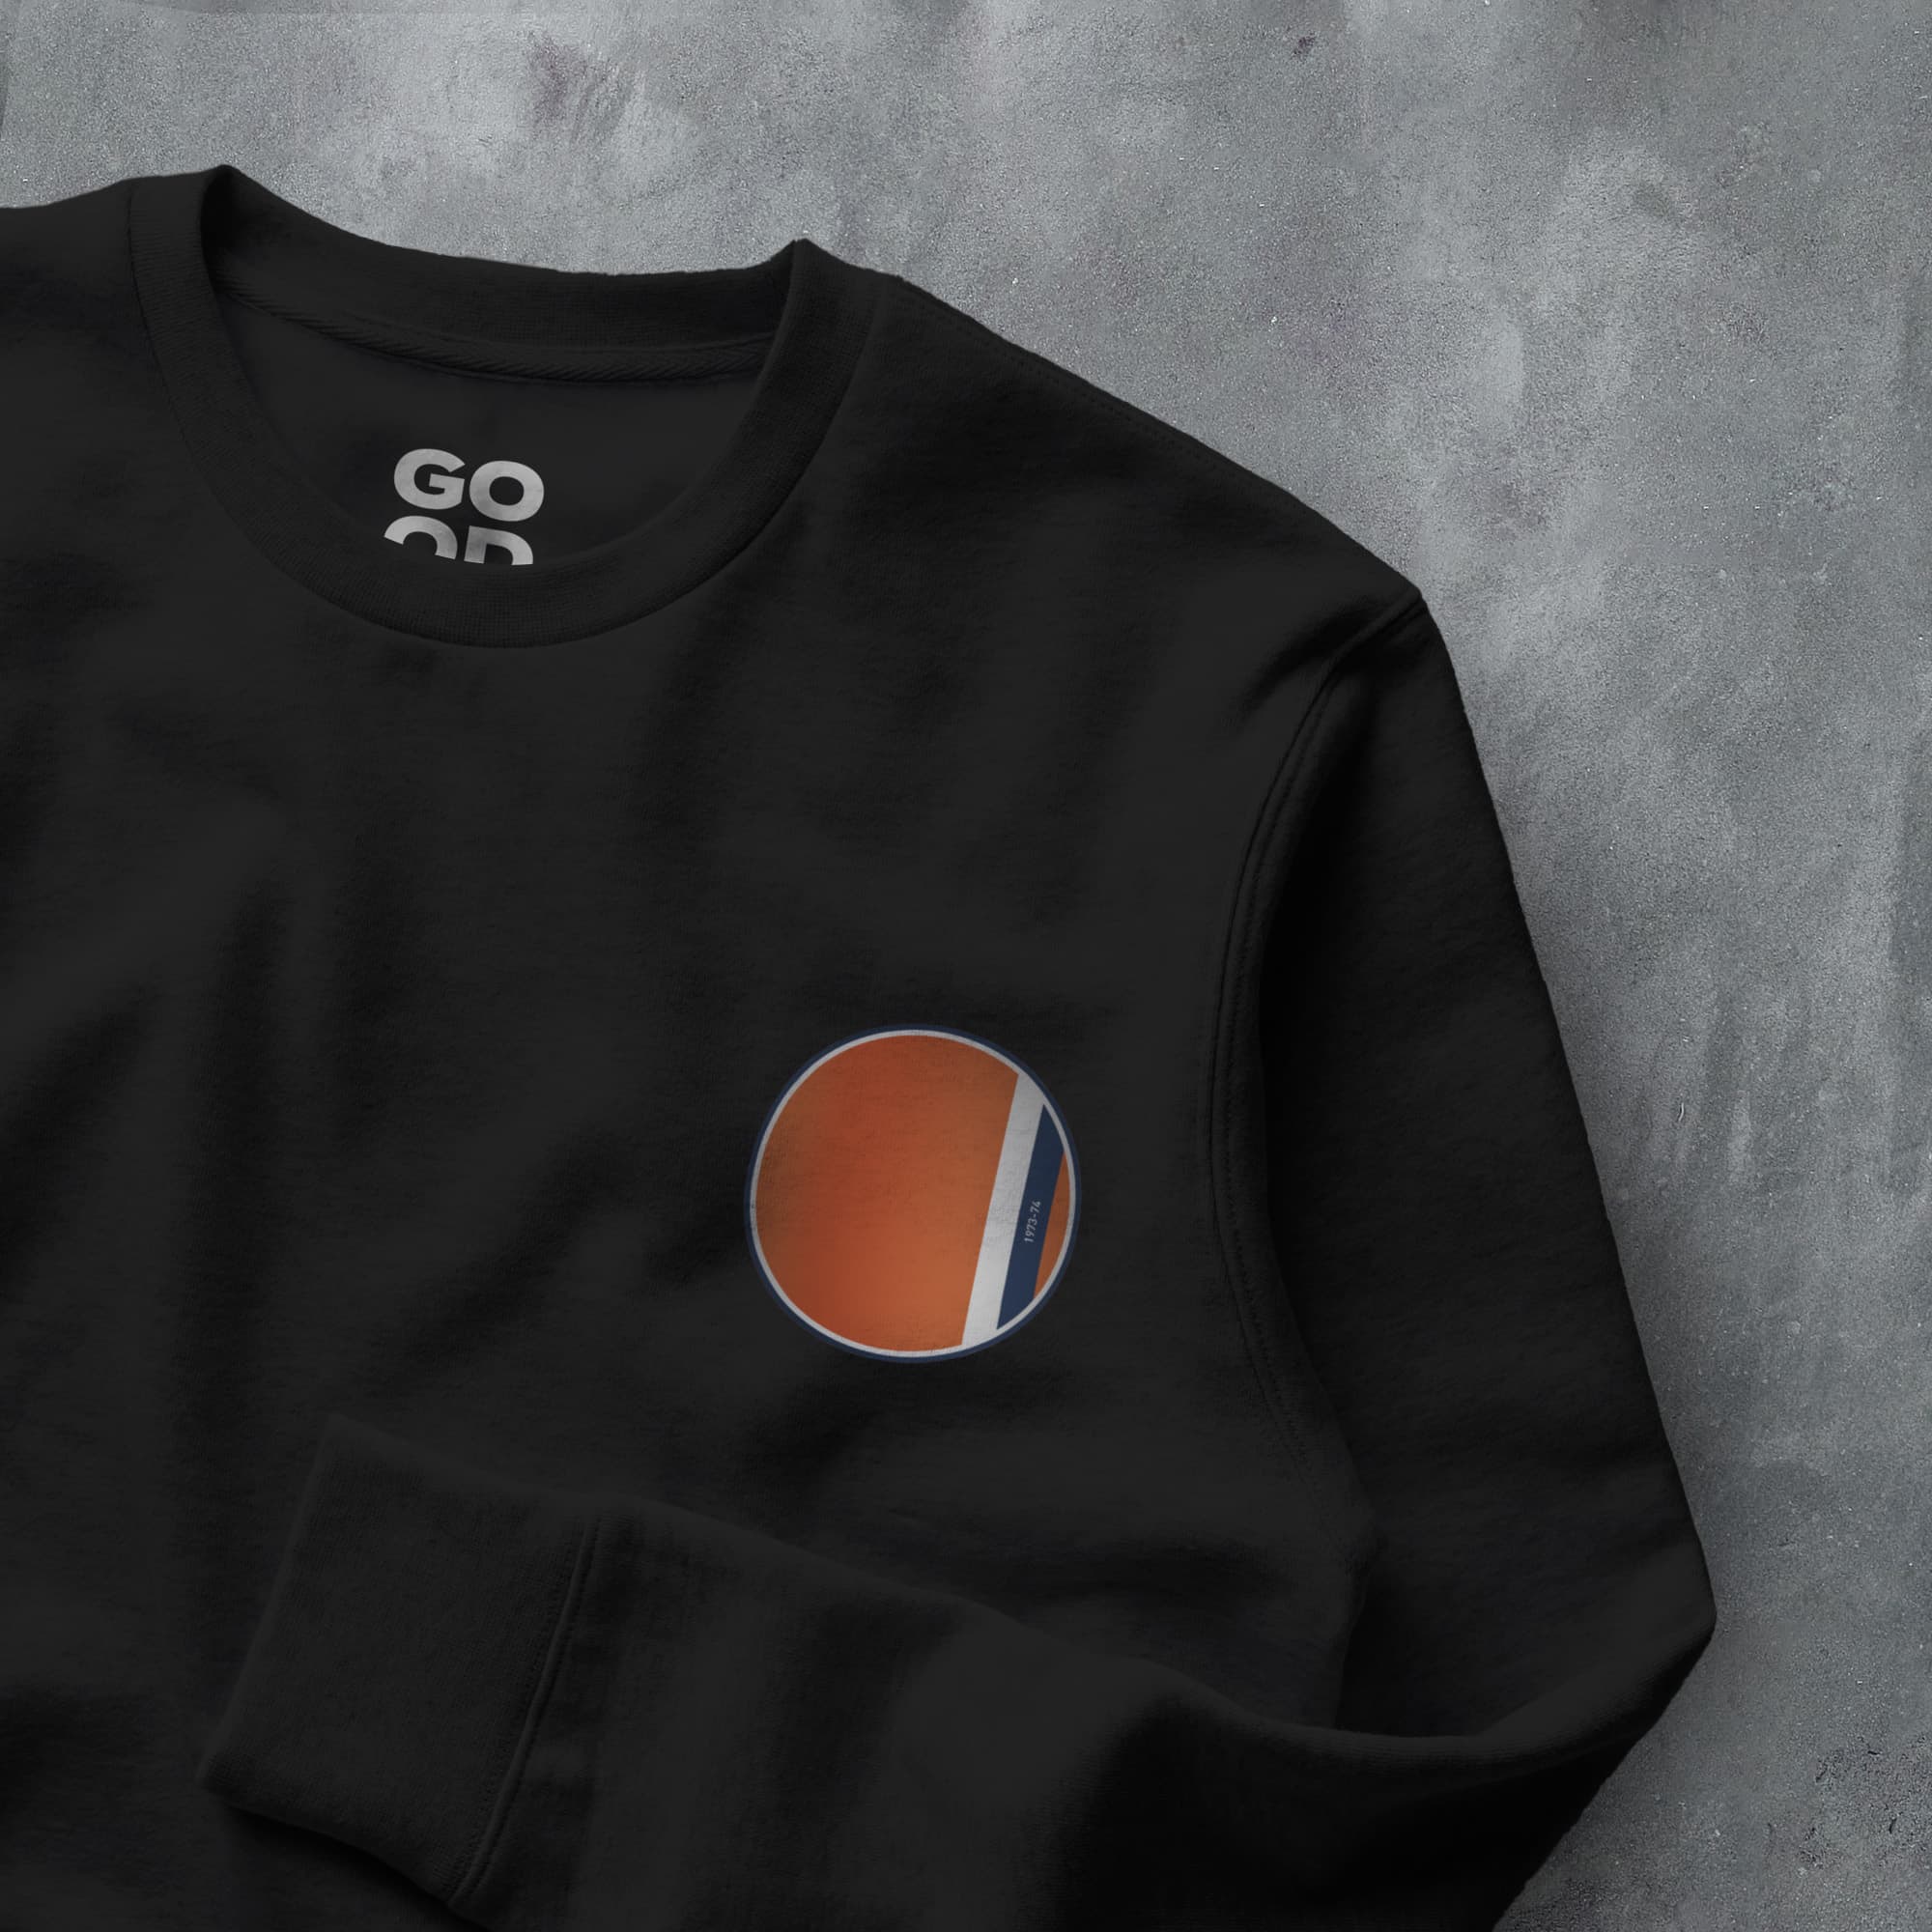 a black sweatshirt with an orange and blue circle on it